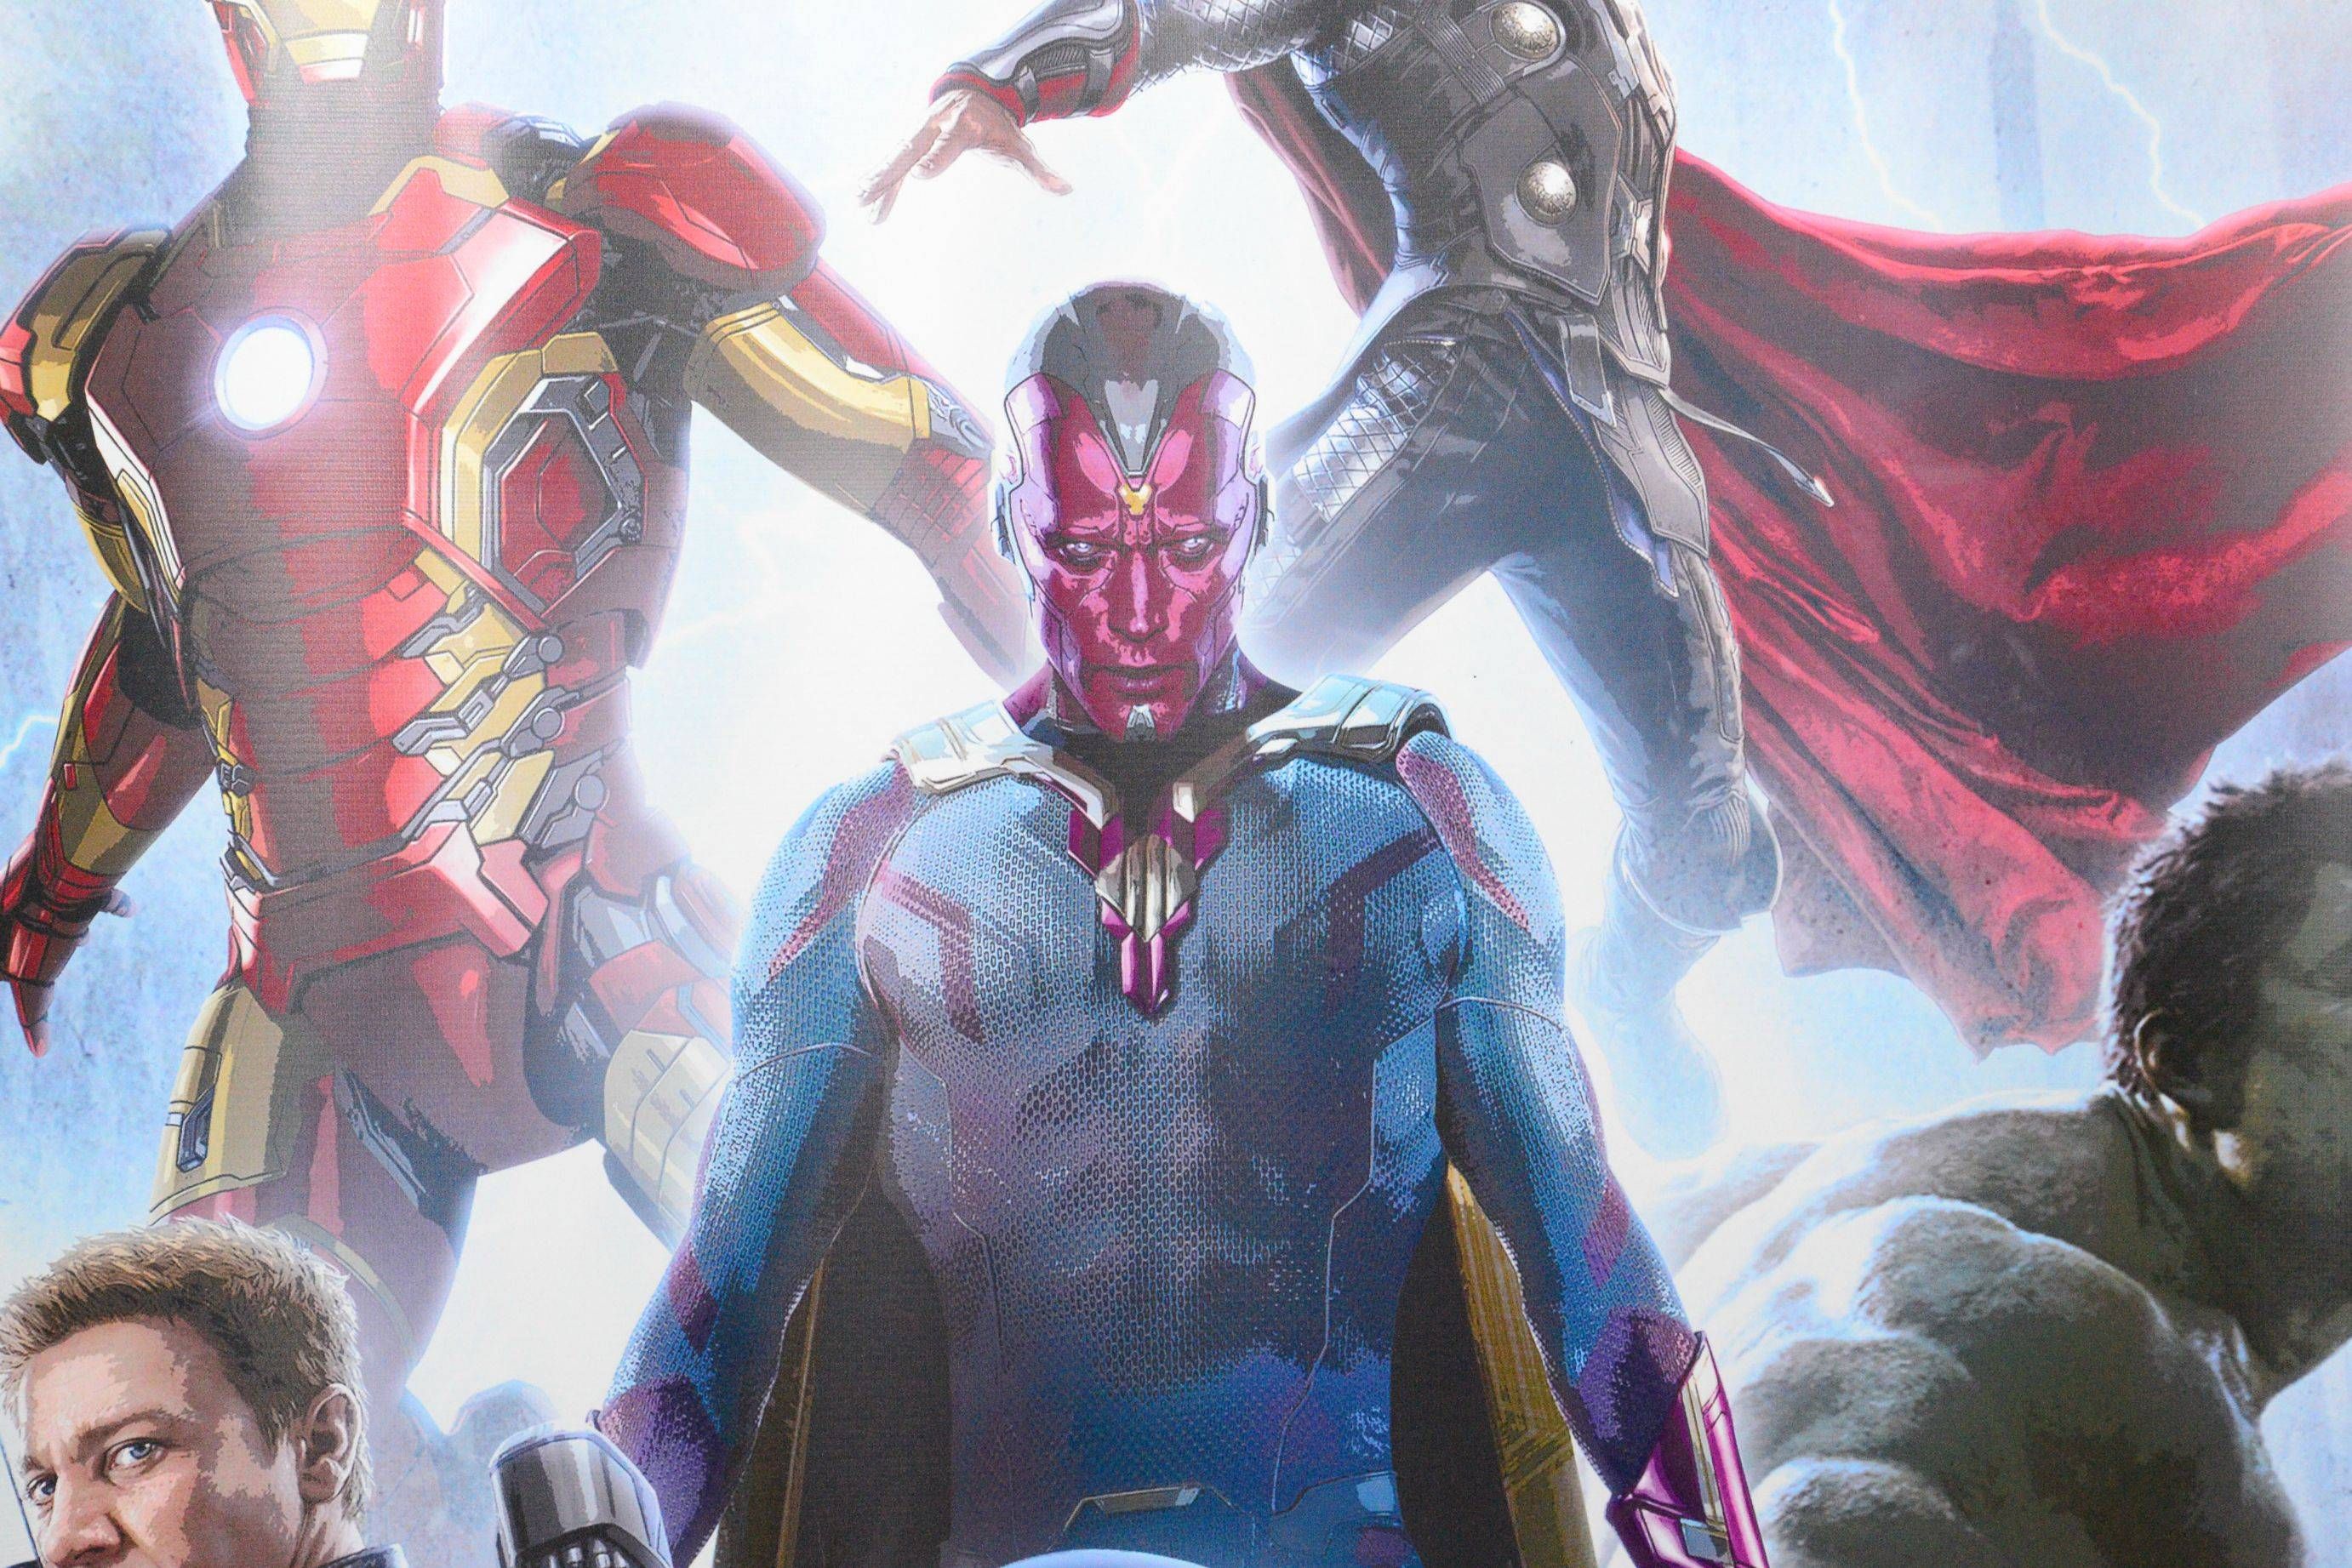 New Avengers: Age of Ultron Artwork Featuring The Vision | Collider